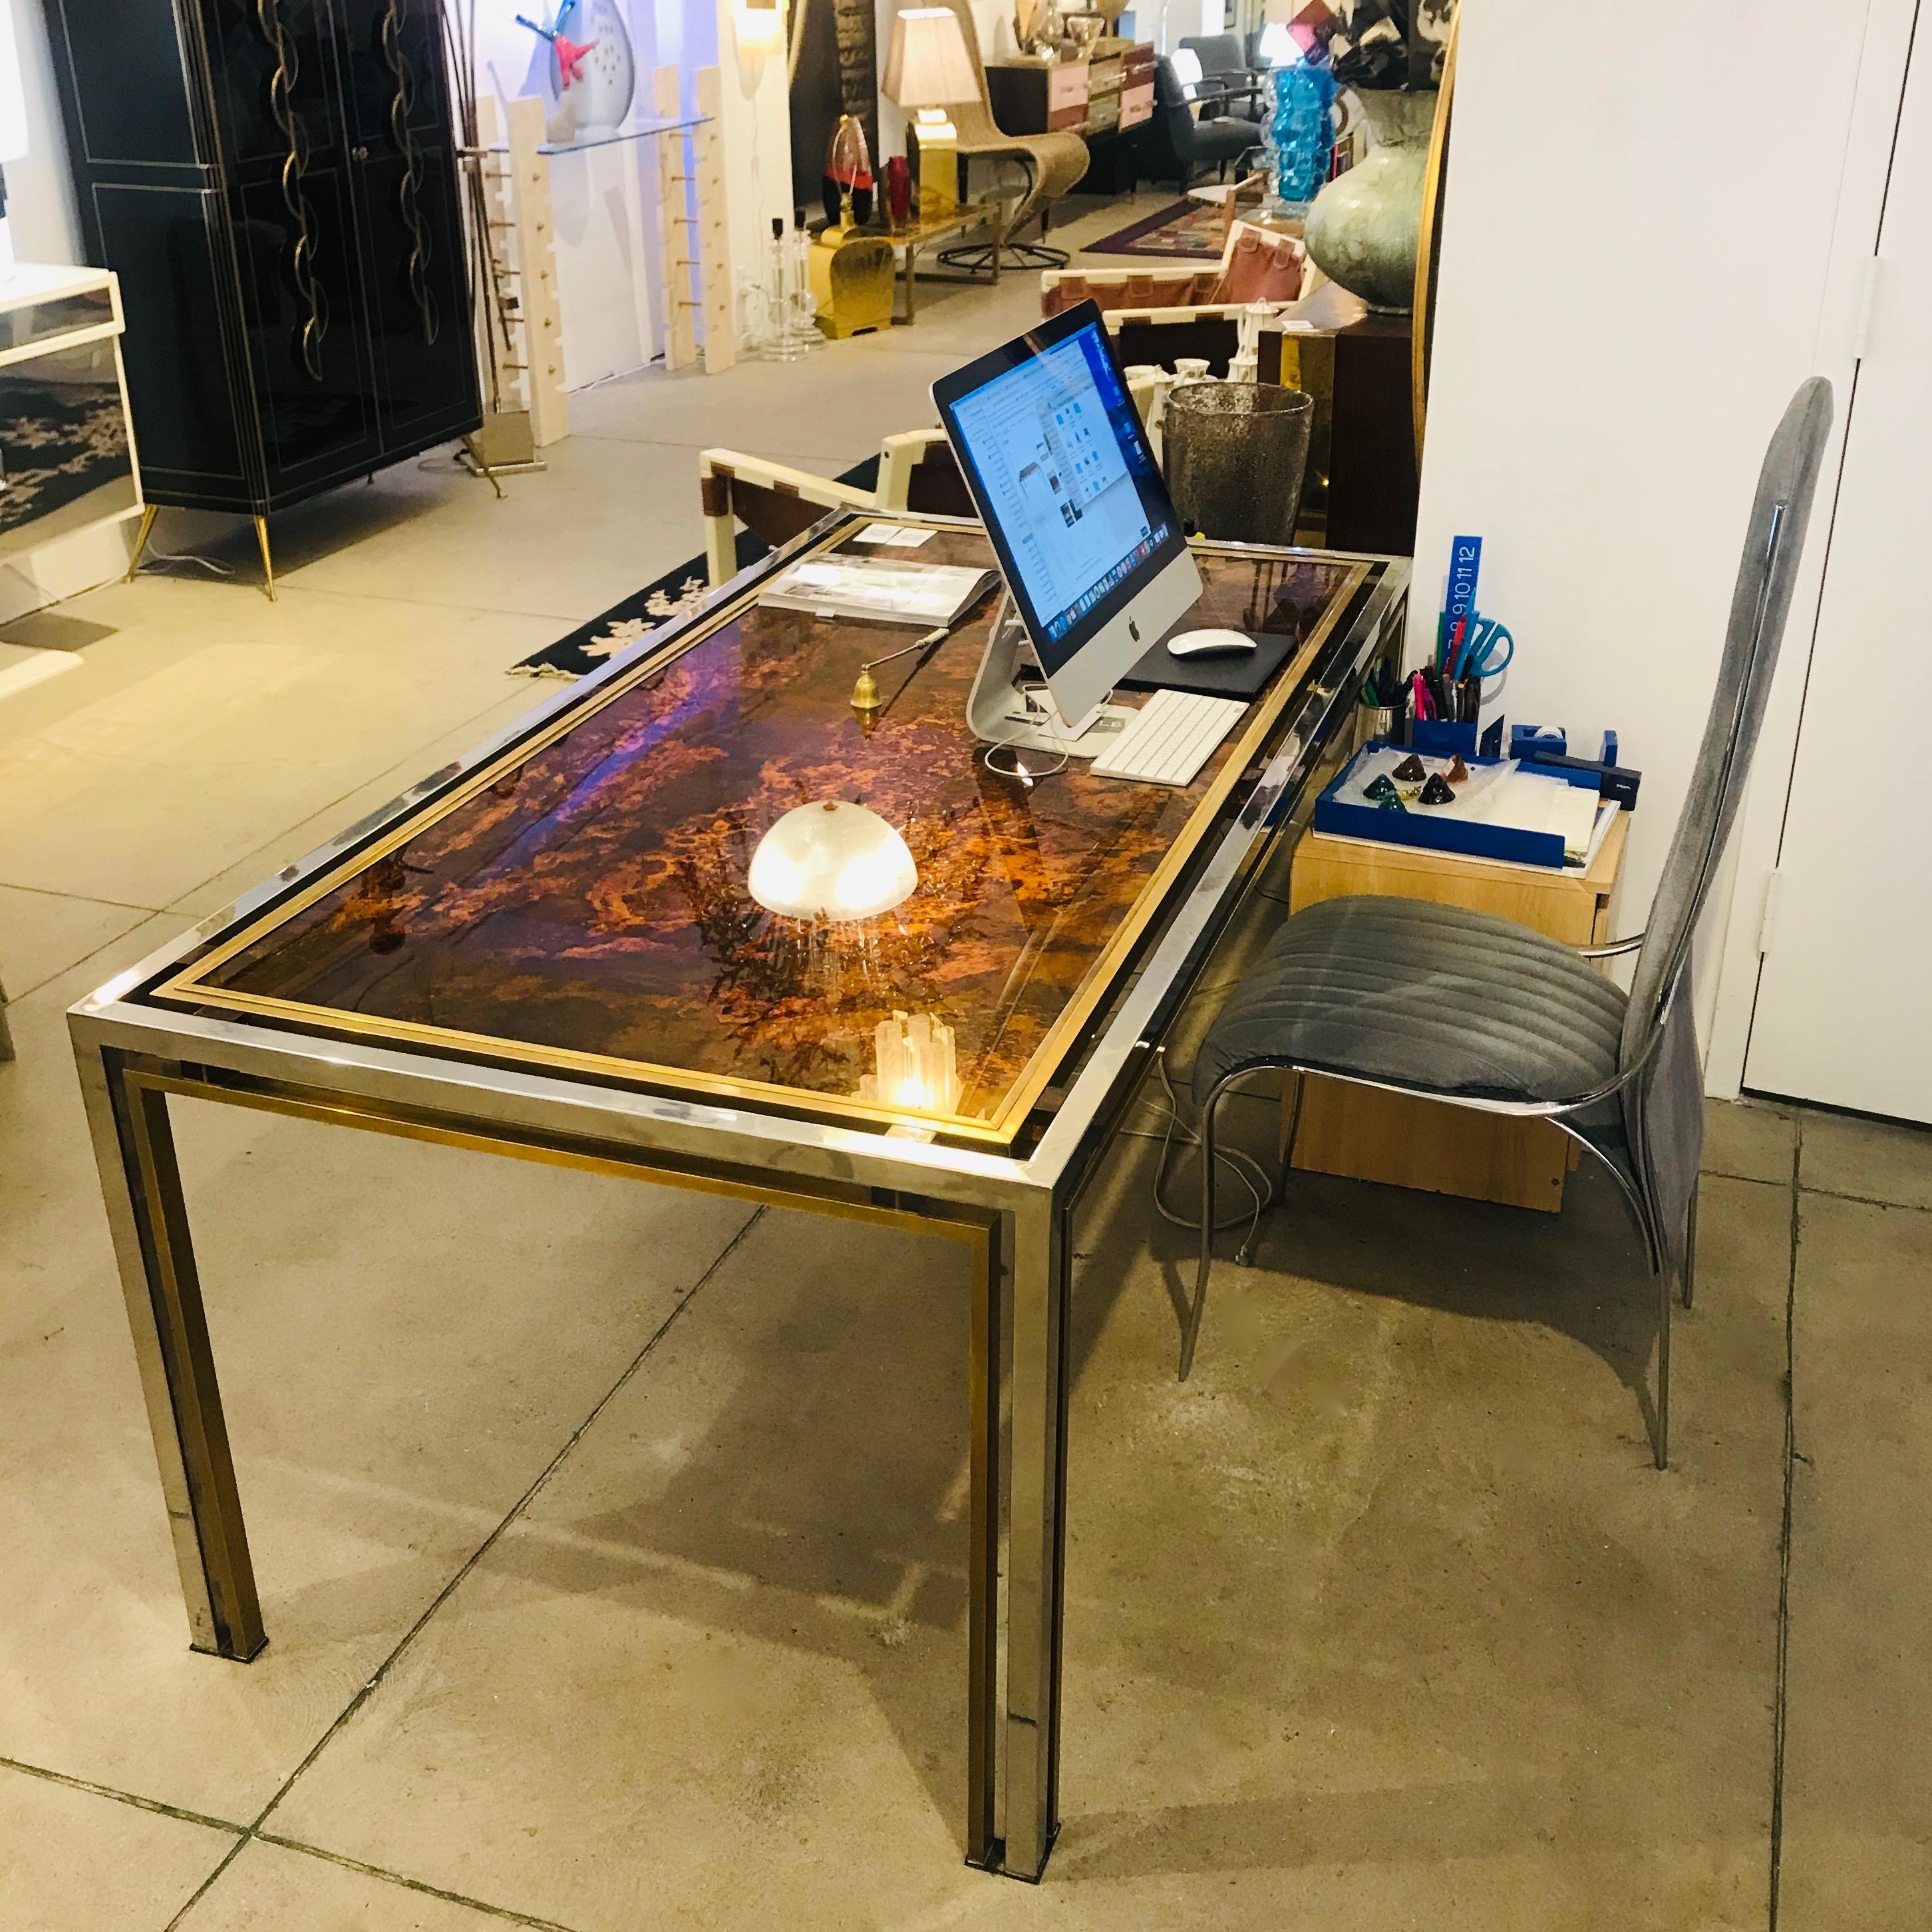 A superb table by Romeo Rega, very elegant with sophisticated Design and clean lines, the floating double-framed eglomise glass top is a magnificent Work of Art painted on reverse with faux tortoise decor of gold leaf inclusions and lacquer and is